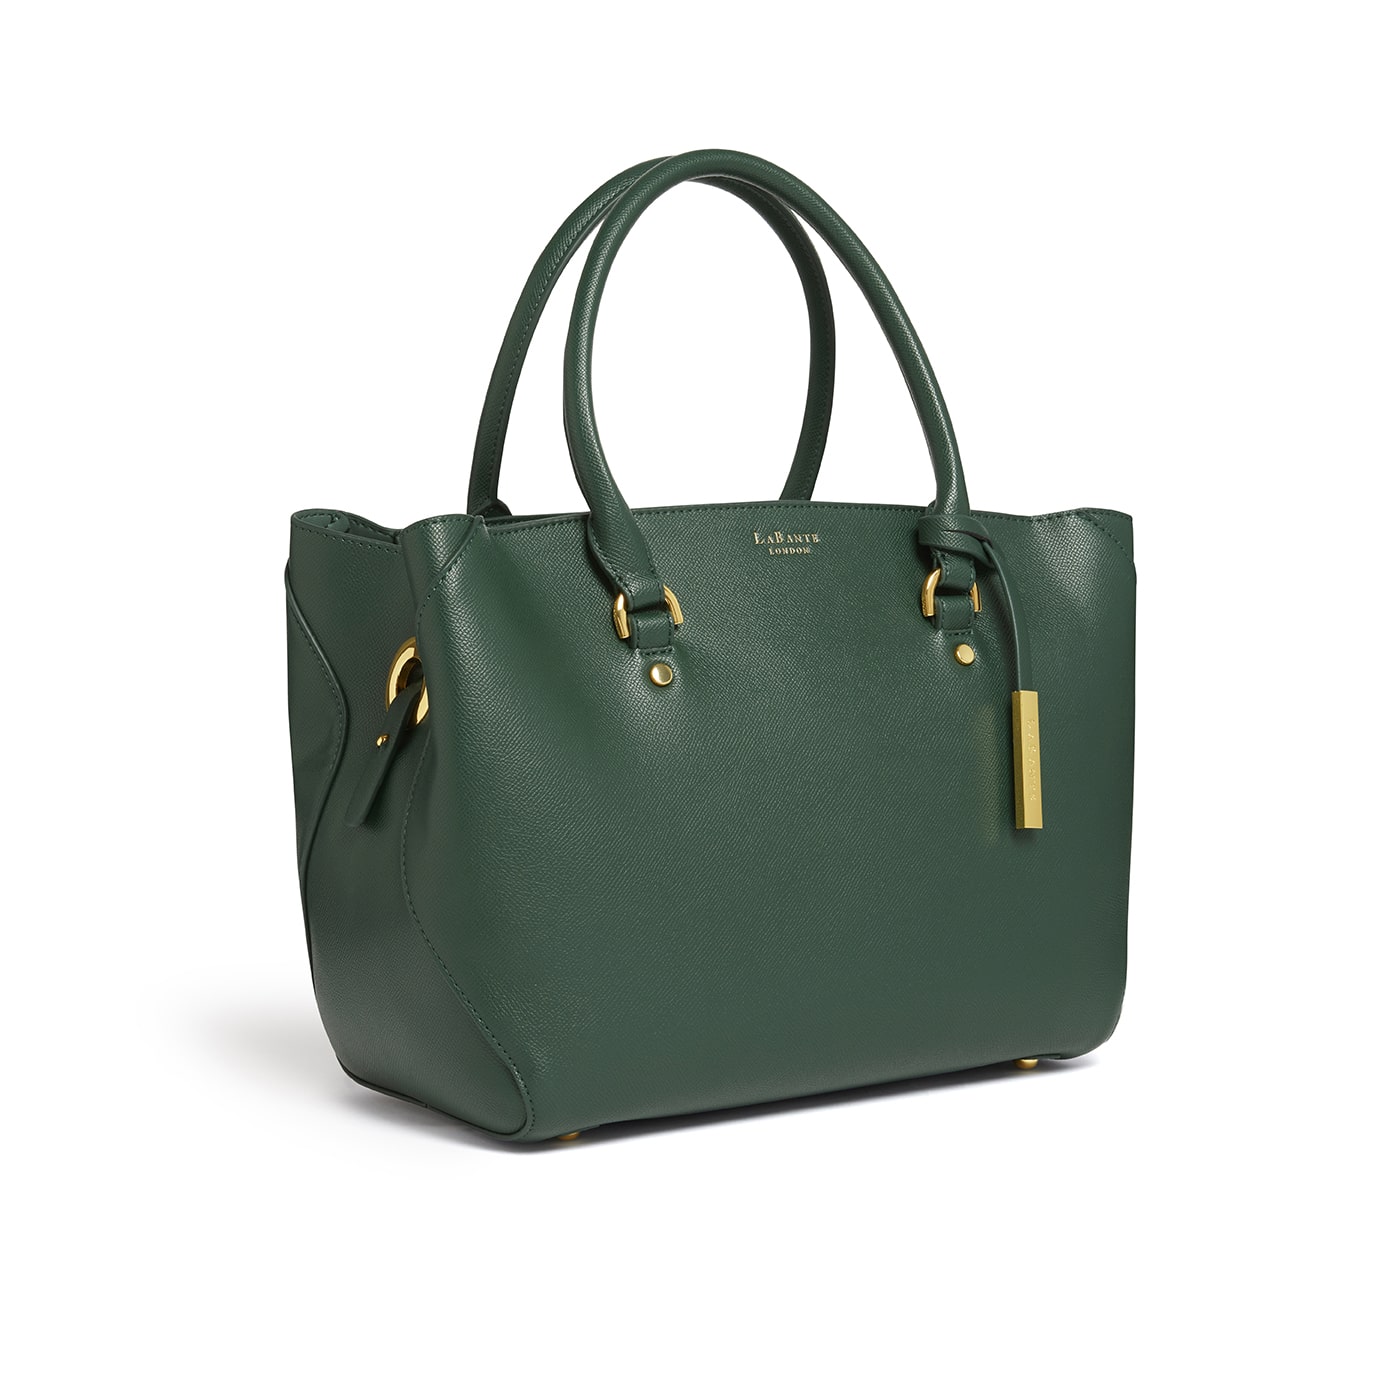 Sophie Forest Green Tote Bag | Vegan, sustainable & ethical